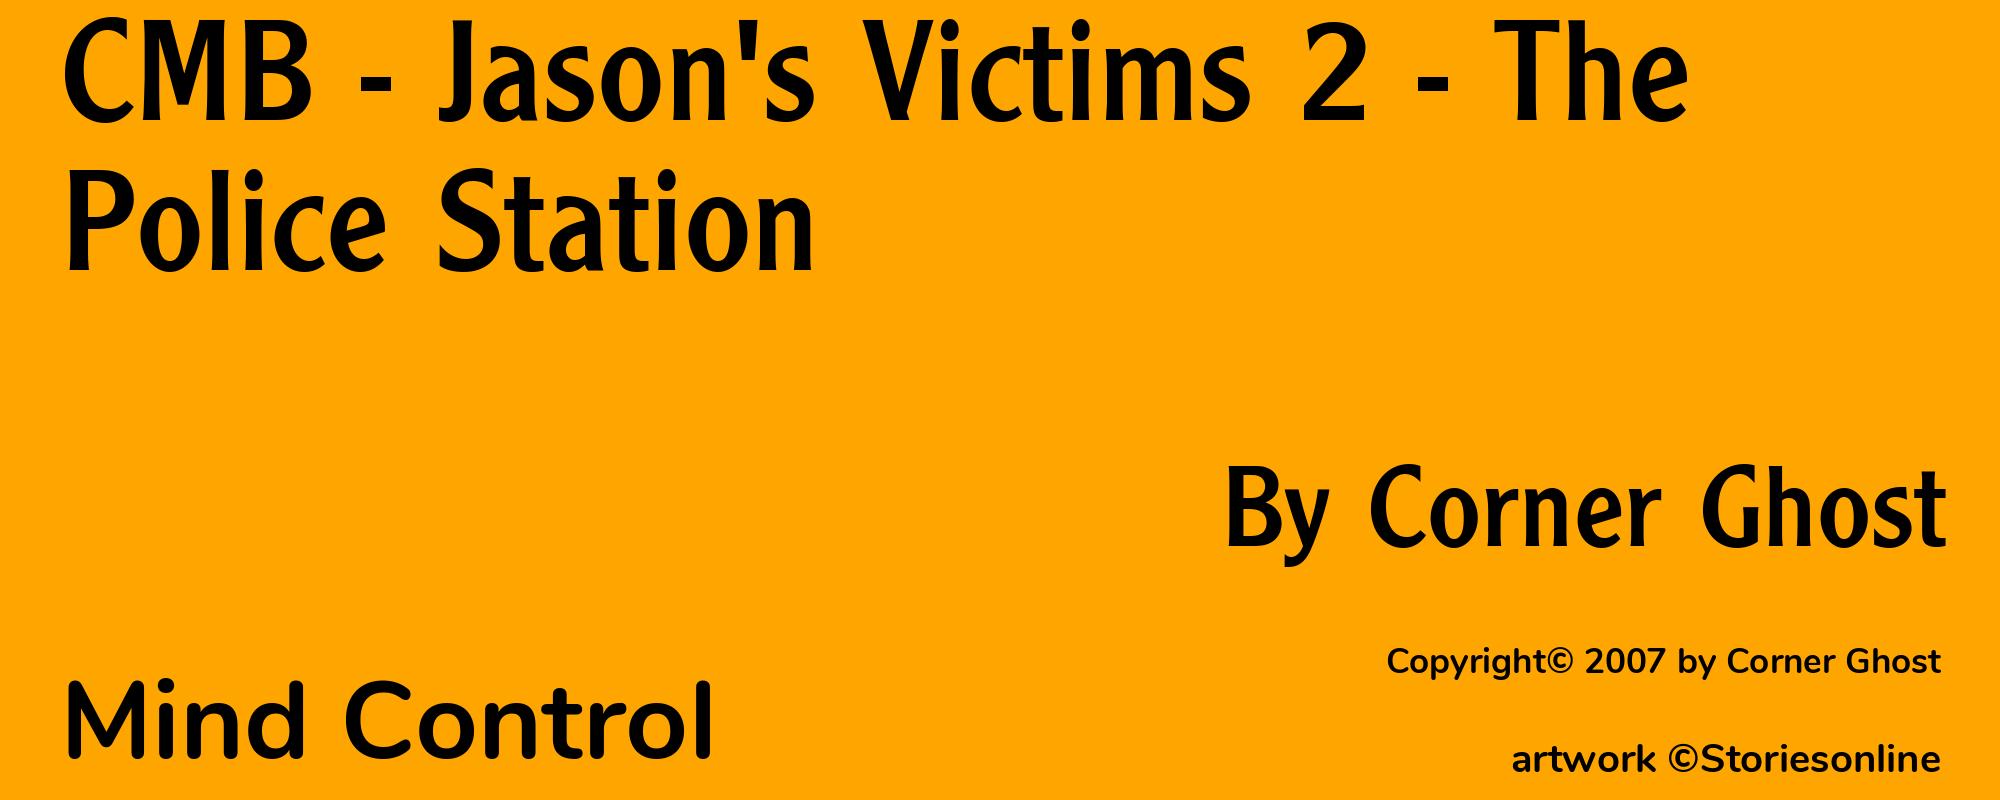 CMB - Jason's Victims 2 - The Police Station - Cover